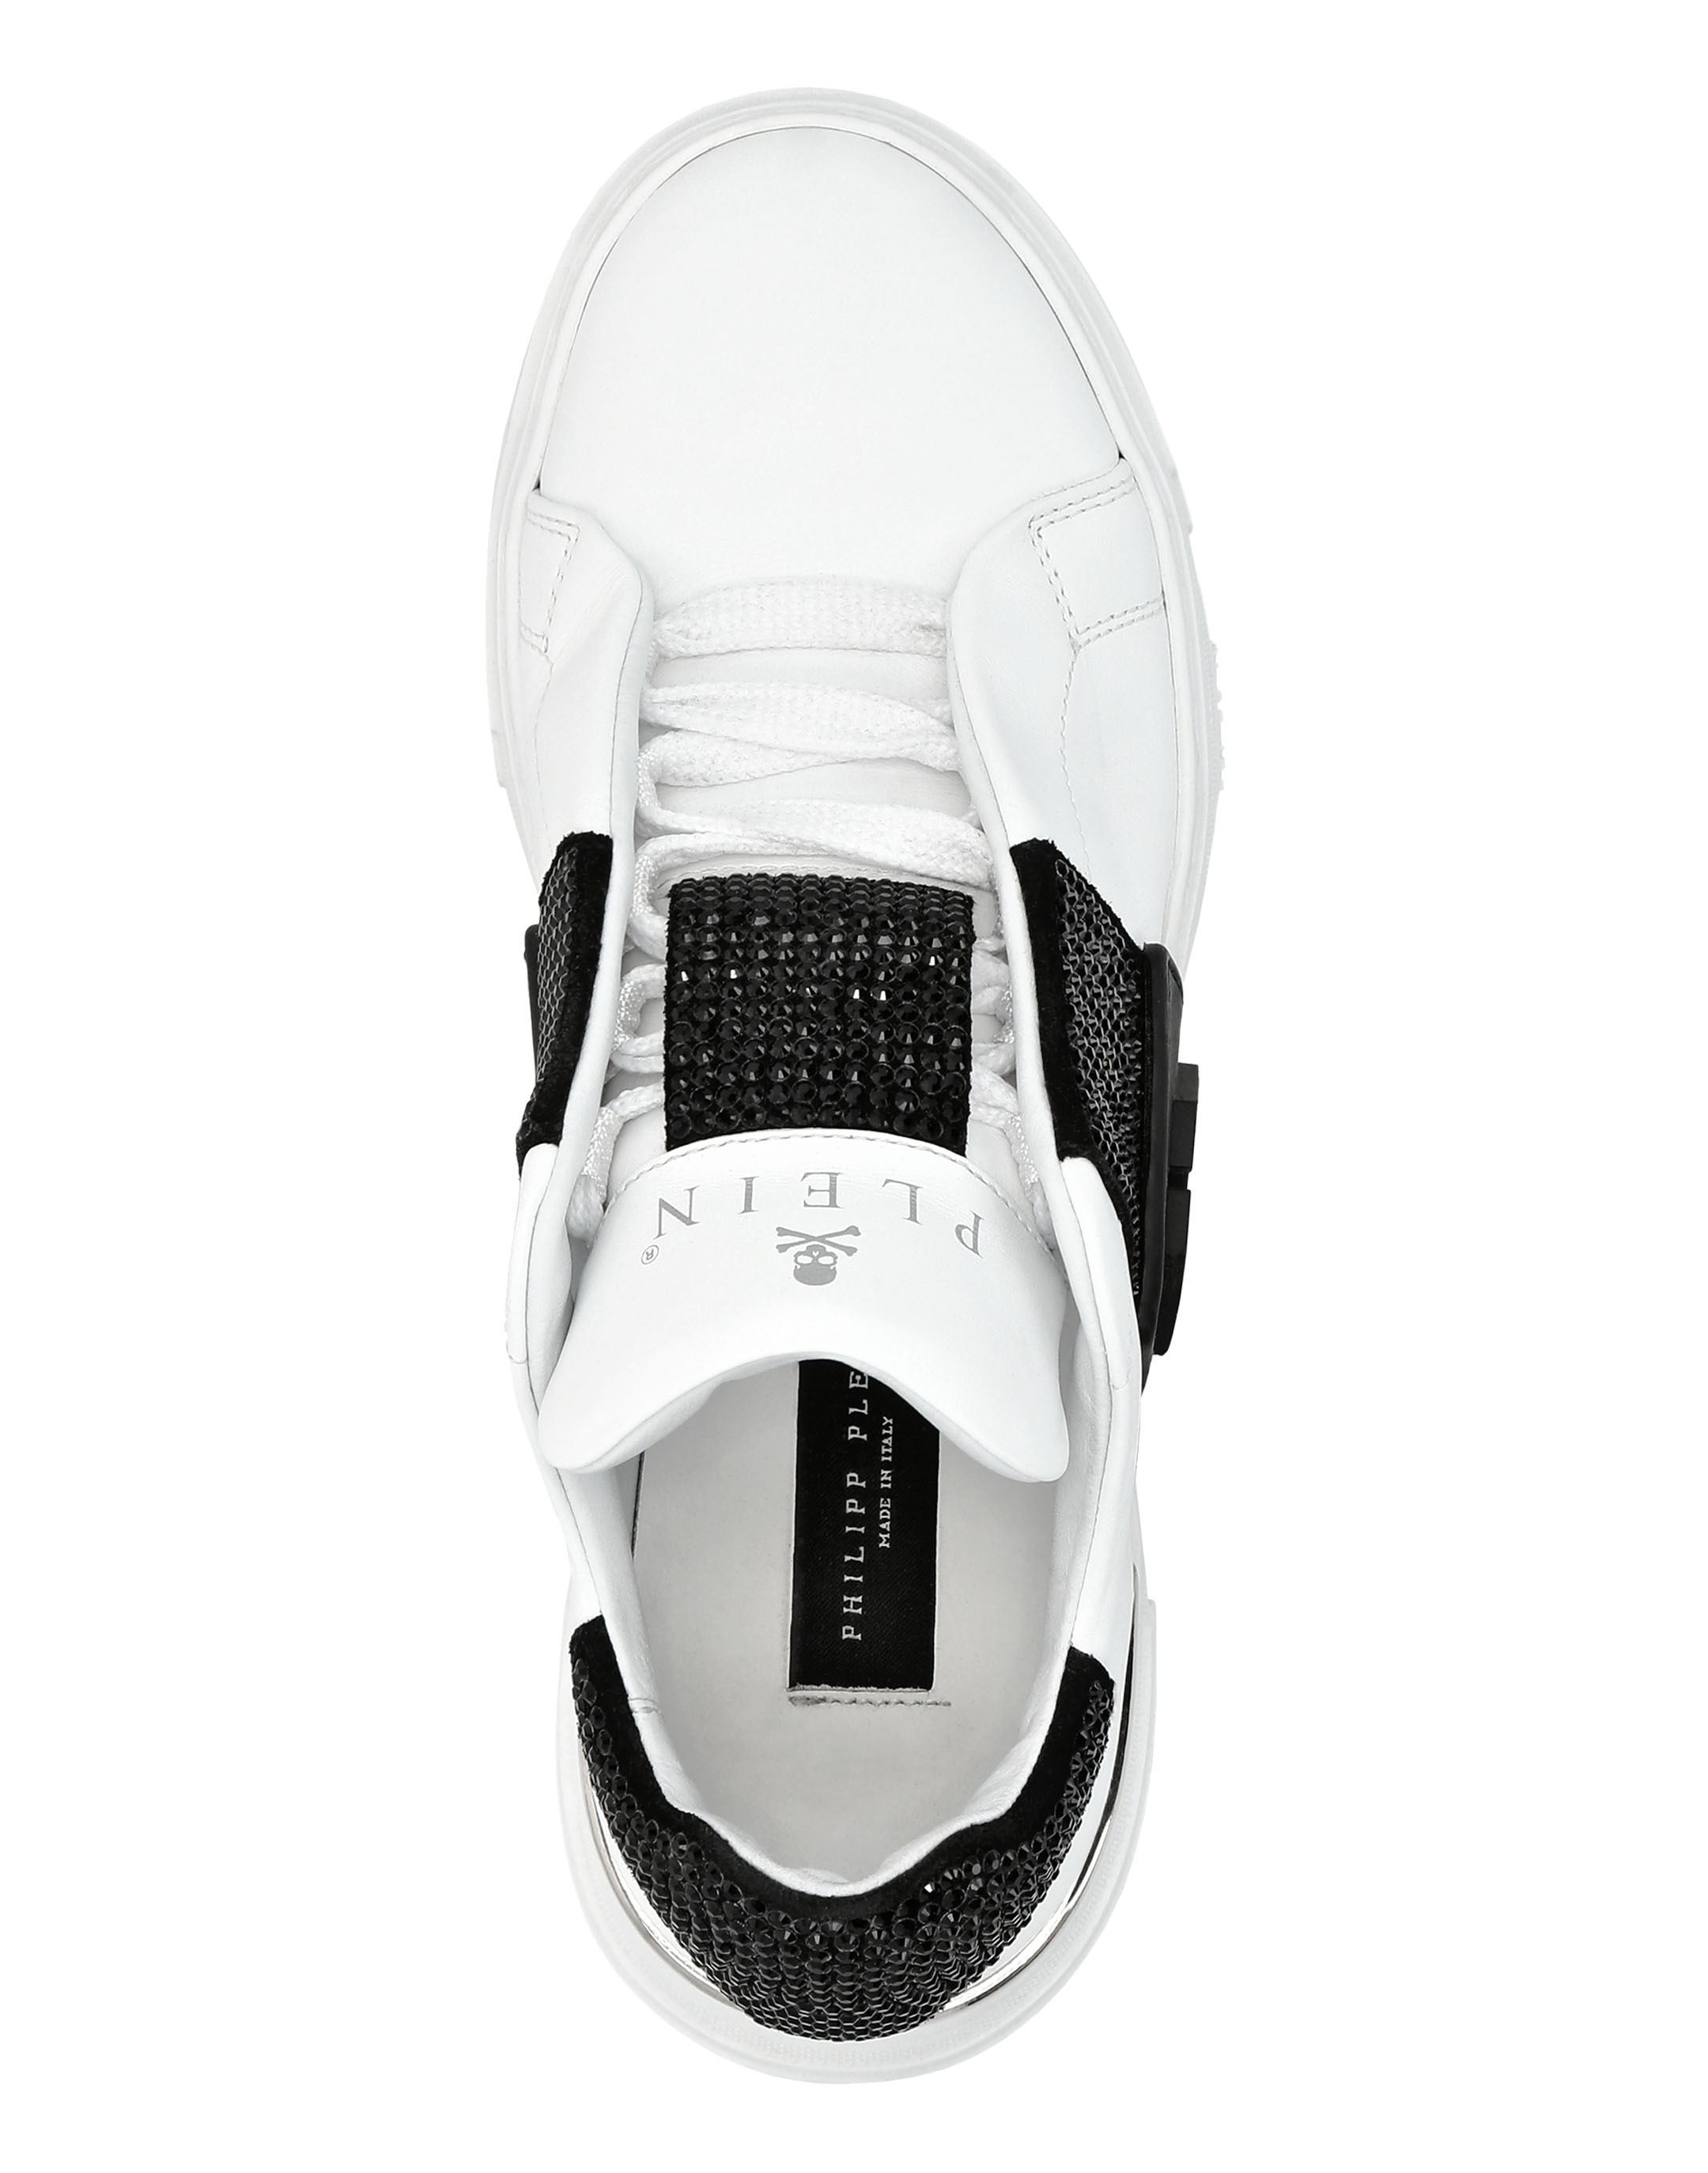 LO-TOP SNEAKERS PHANTOM KICK$ LEATHER HEXAGON WITH Crystals | Philipp Plein  Outlet